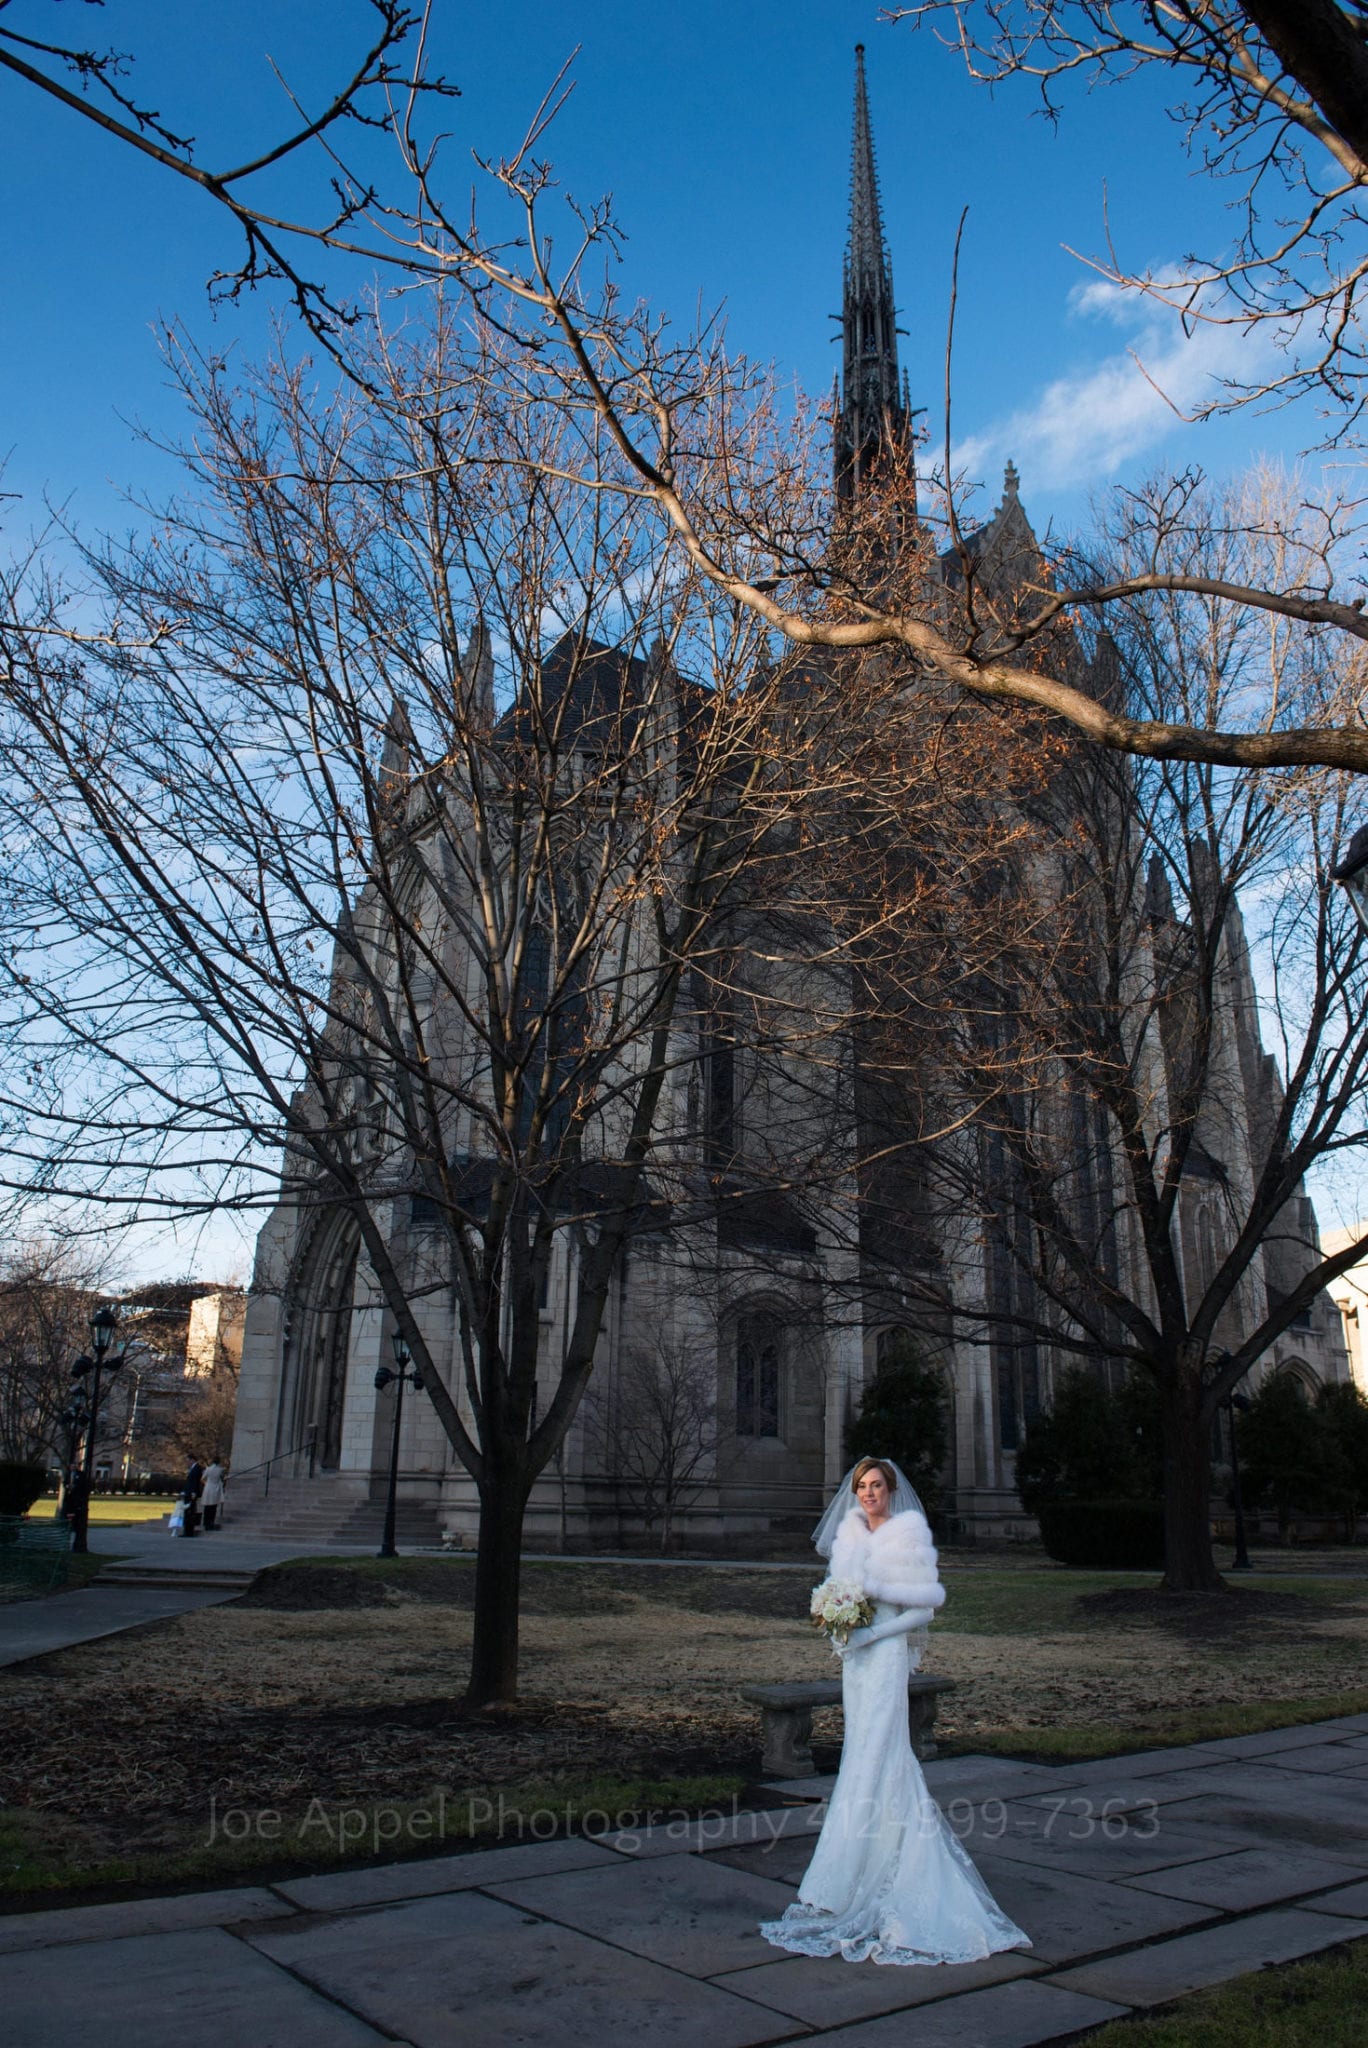 a bride wearing a fur wrap and white gloves stands in a shaft of sunlight with heinz chapel visible through the leafless trees behind her.